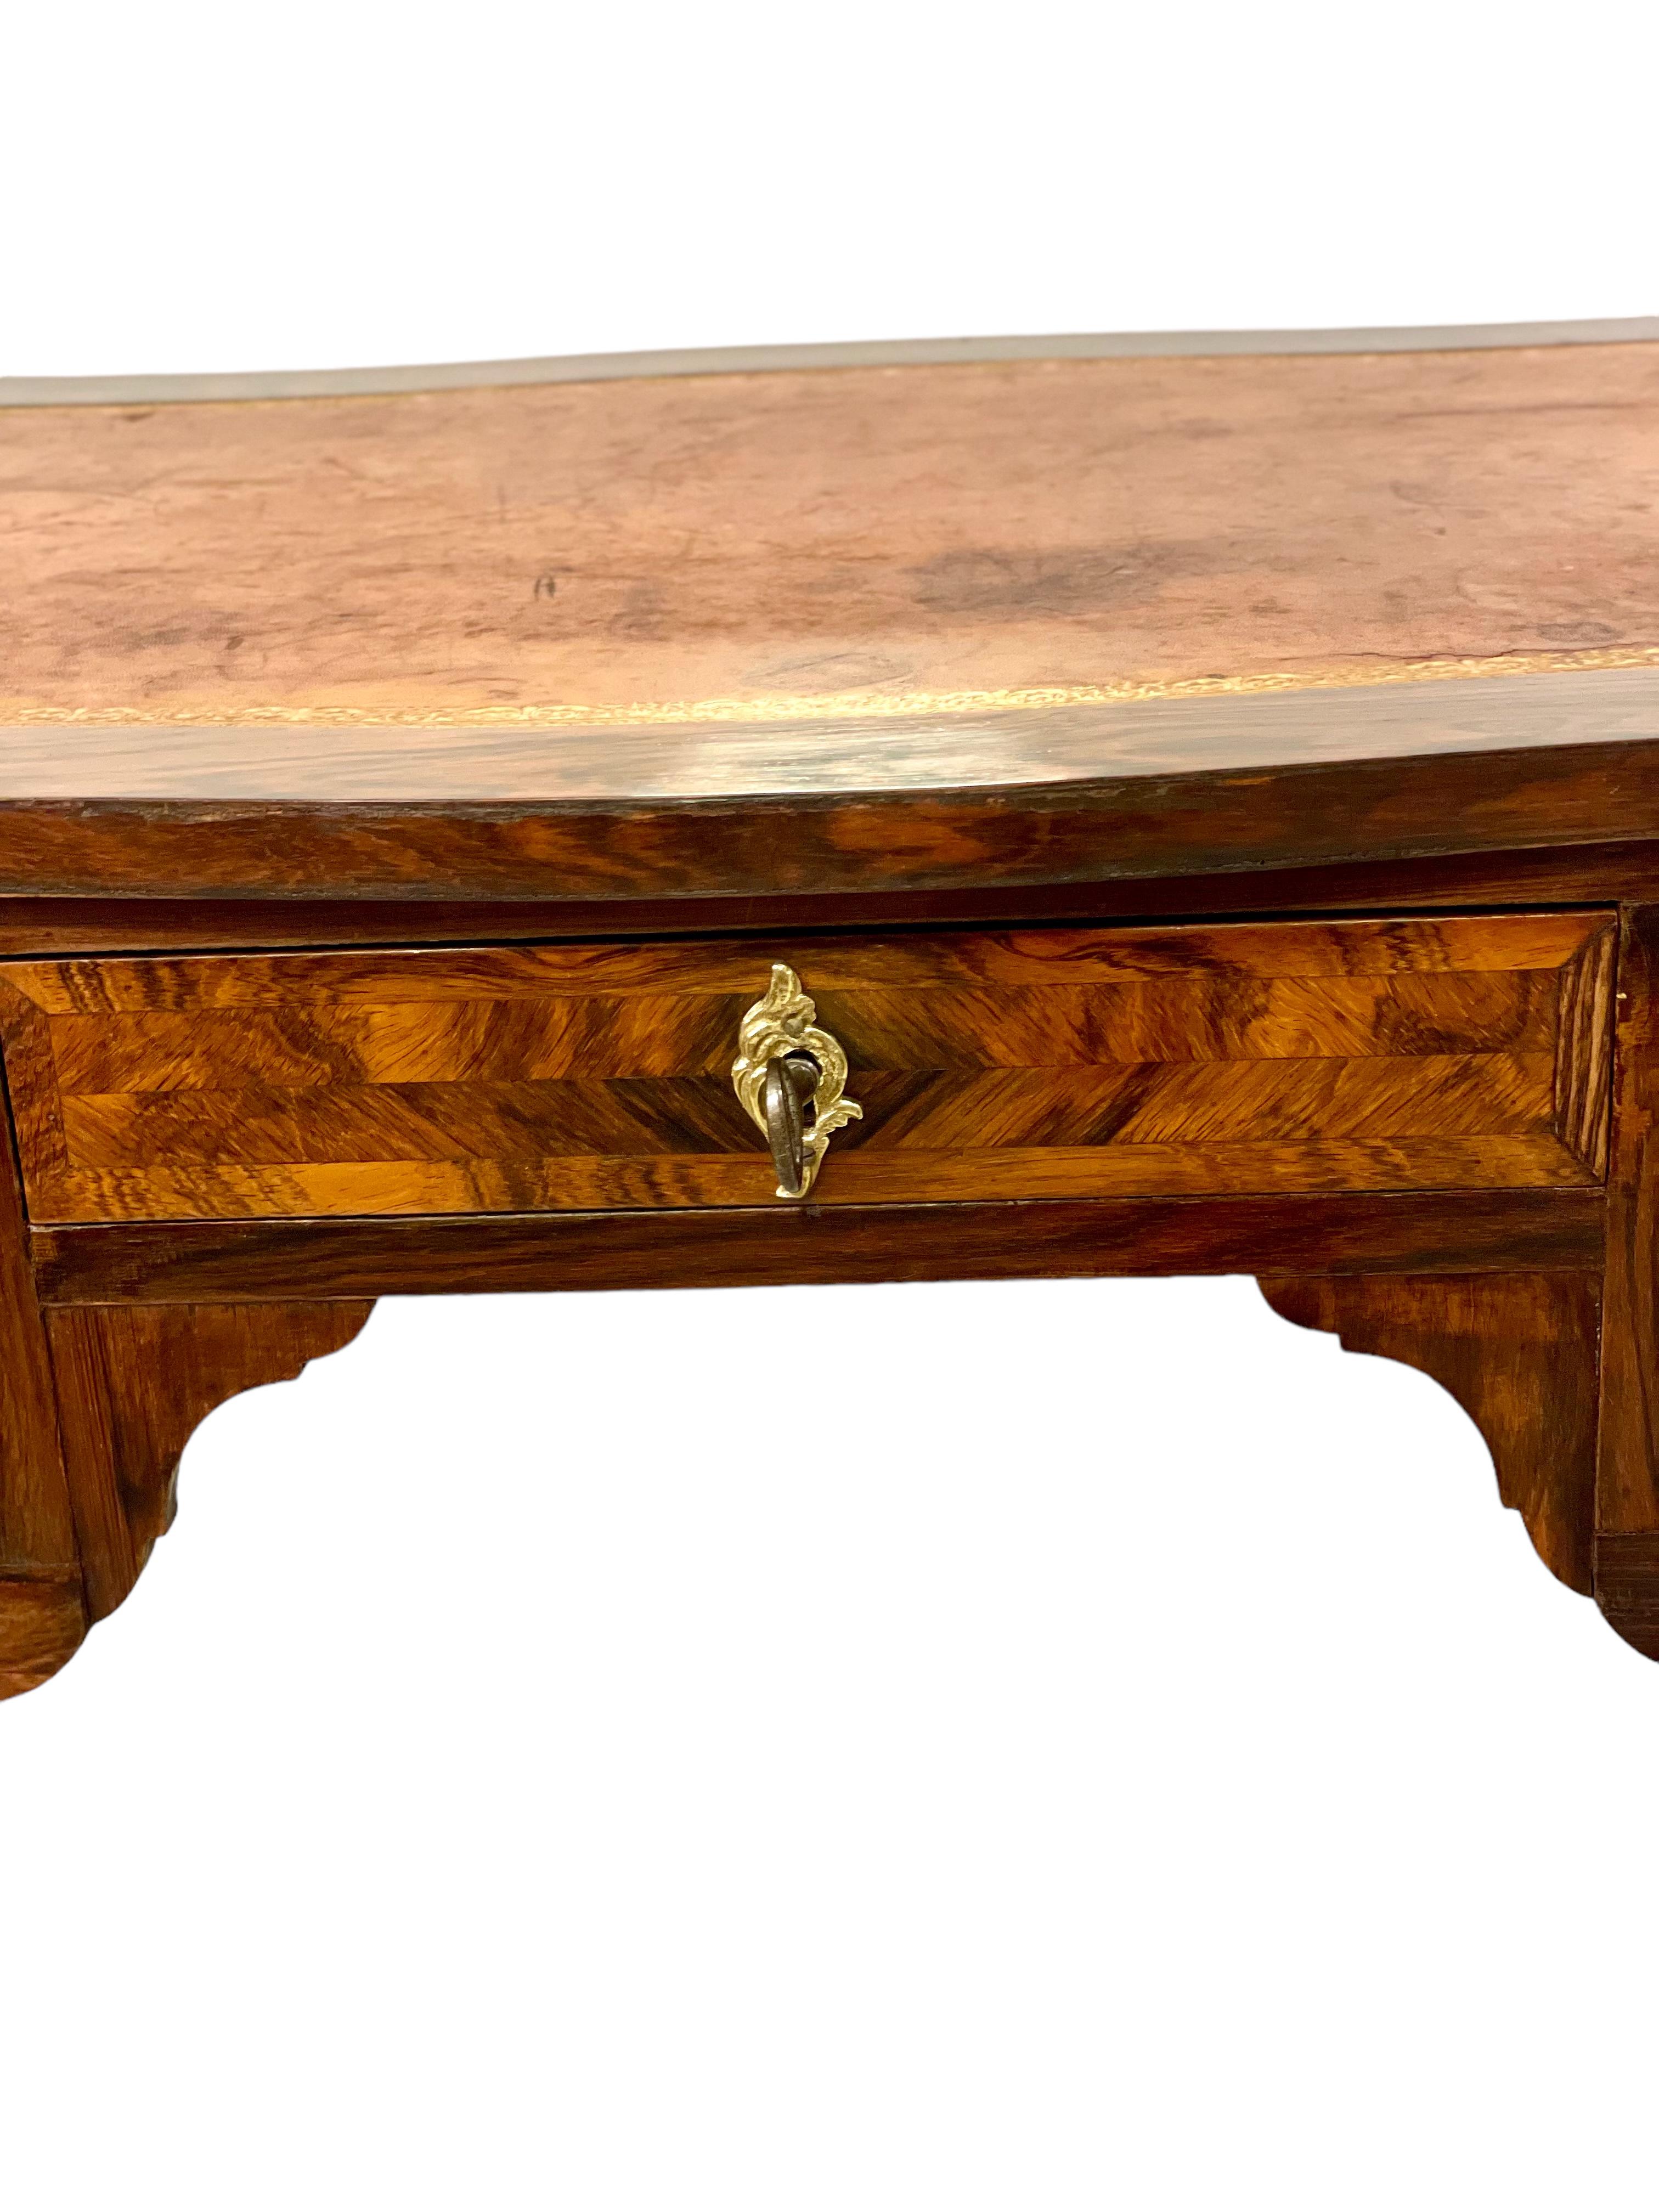 1750s Gilt Bronze Mounted Writing Lady Desk, by Adrien DELORME For Sale 10